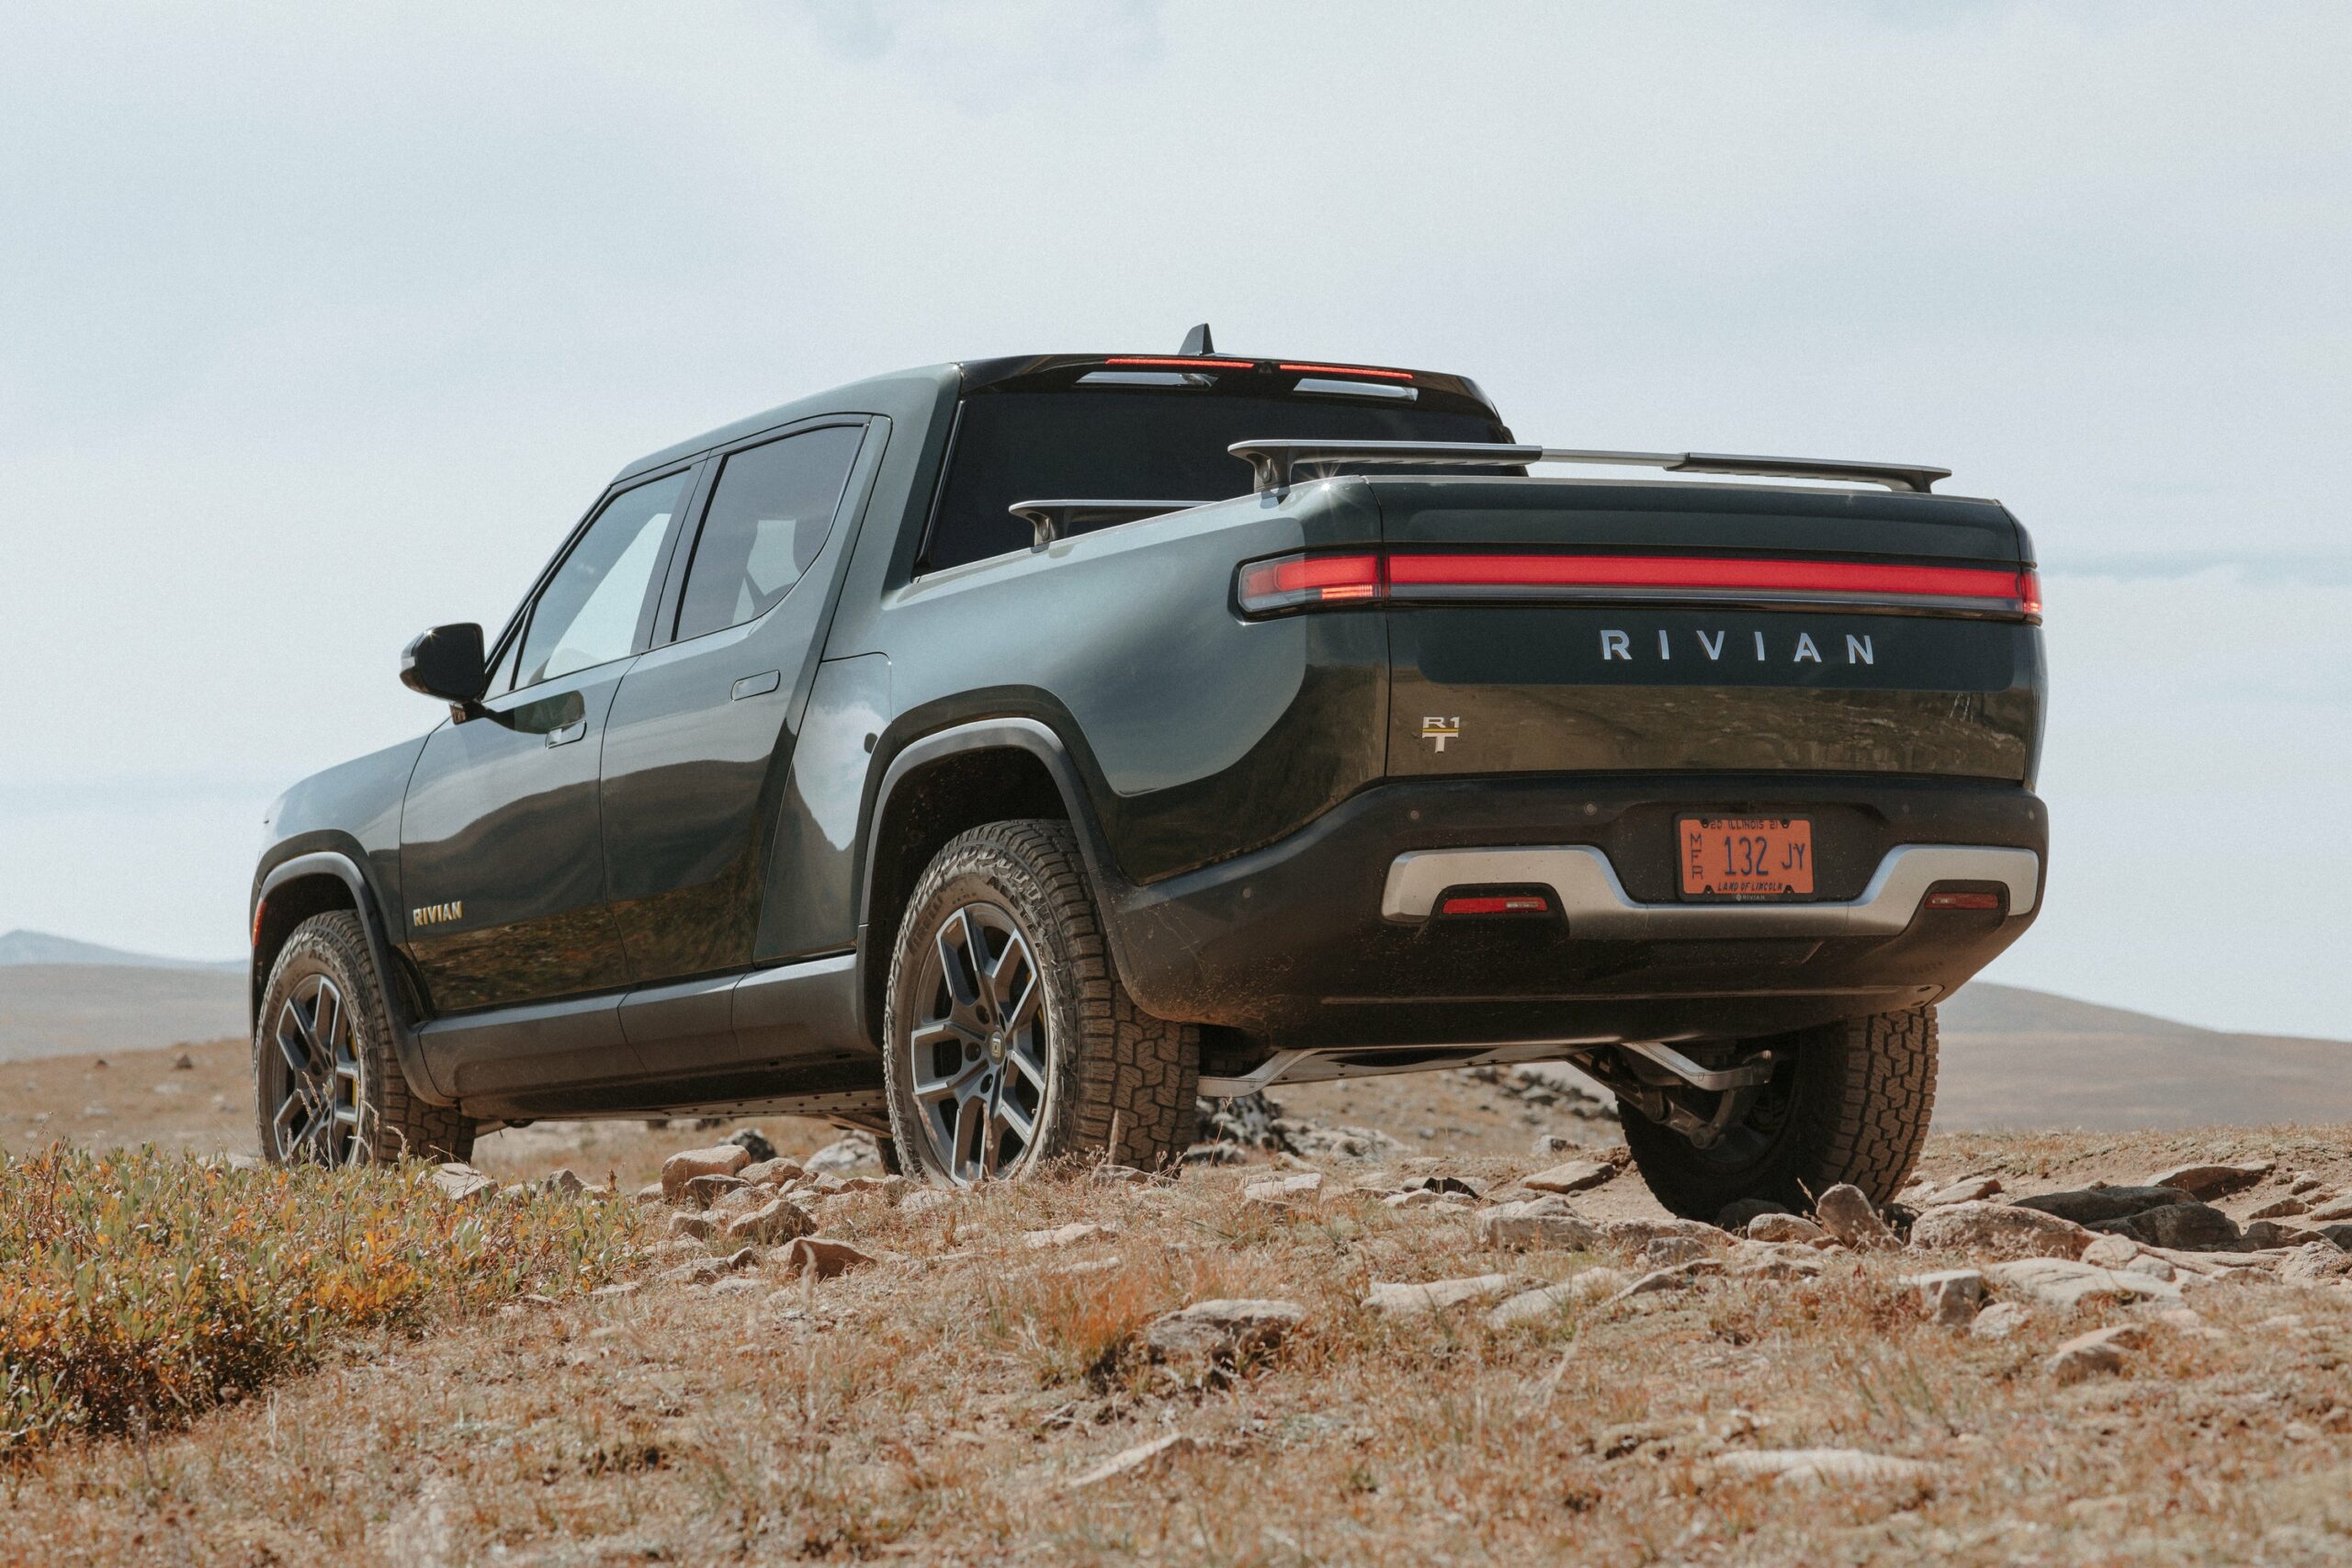 Rivian Shares Have A Seesaw Day As Losses Widen After Earlier Apple Link